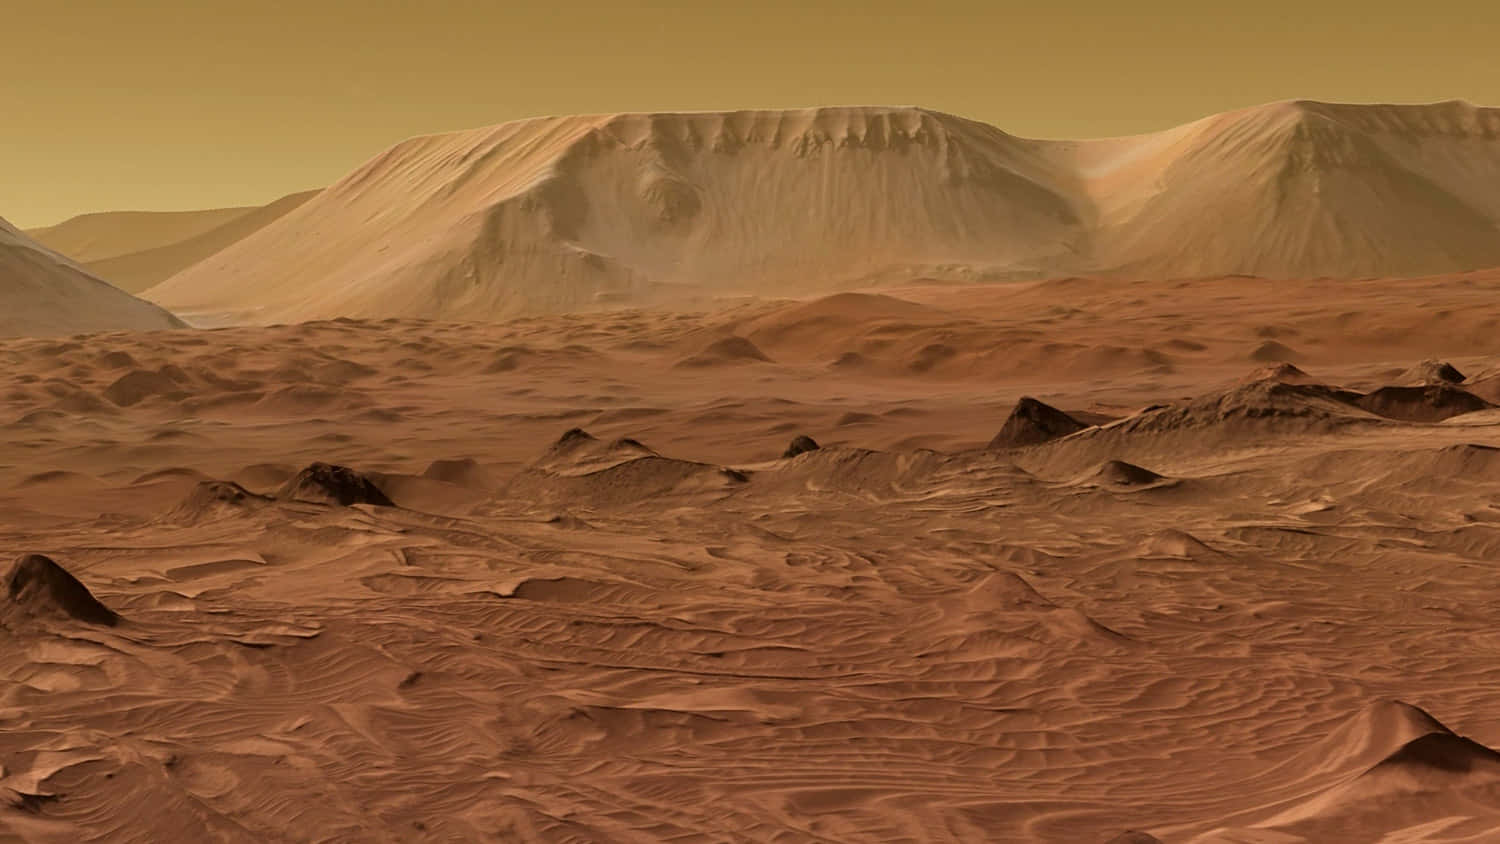 "Wonders of Mars: A Look Into the Red Planet"